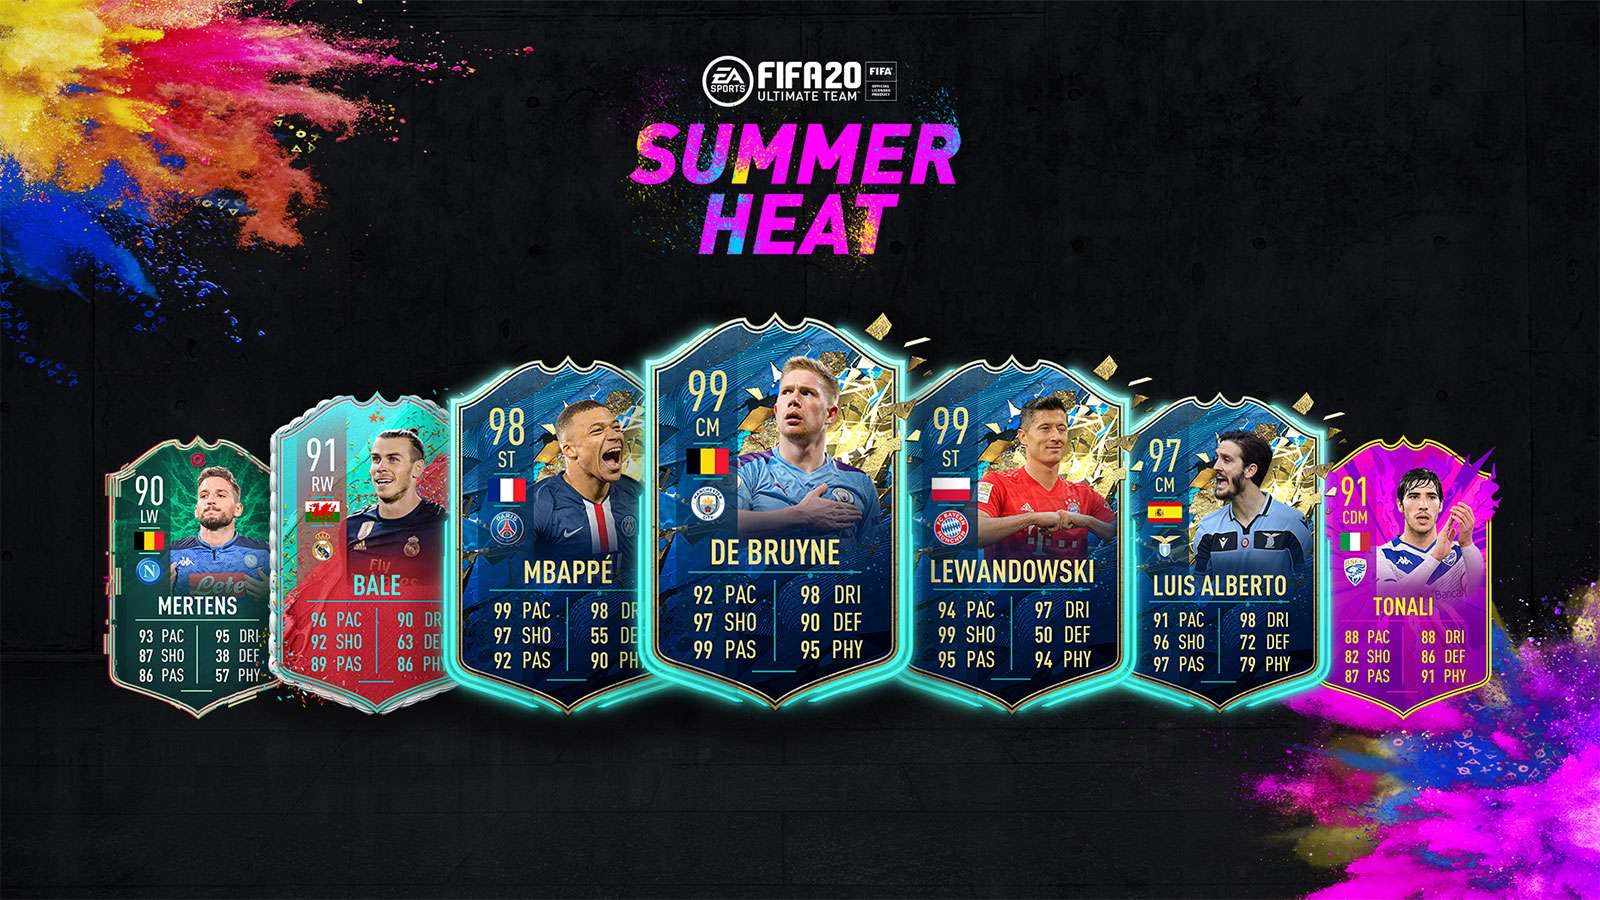 FIFA Summer Heat FUT goes out with a bang